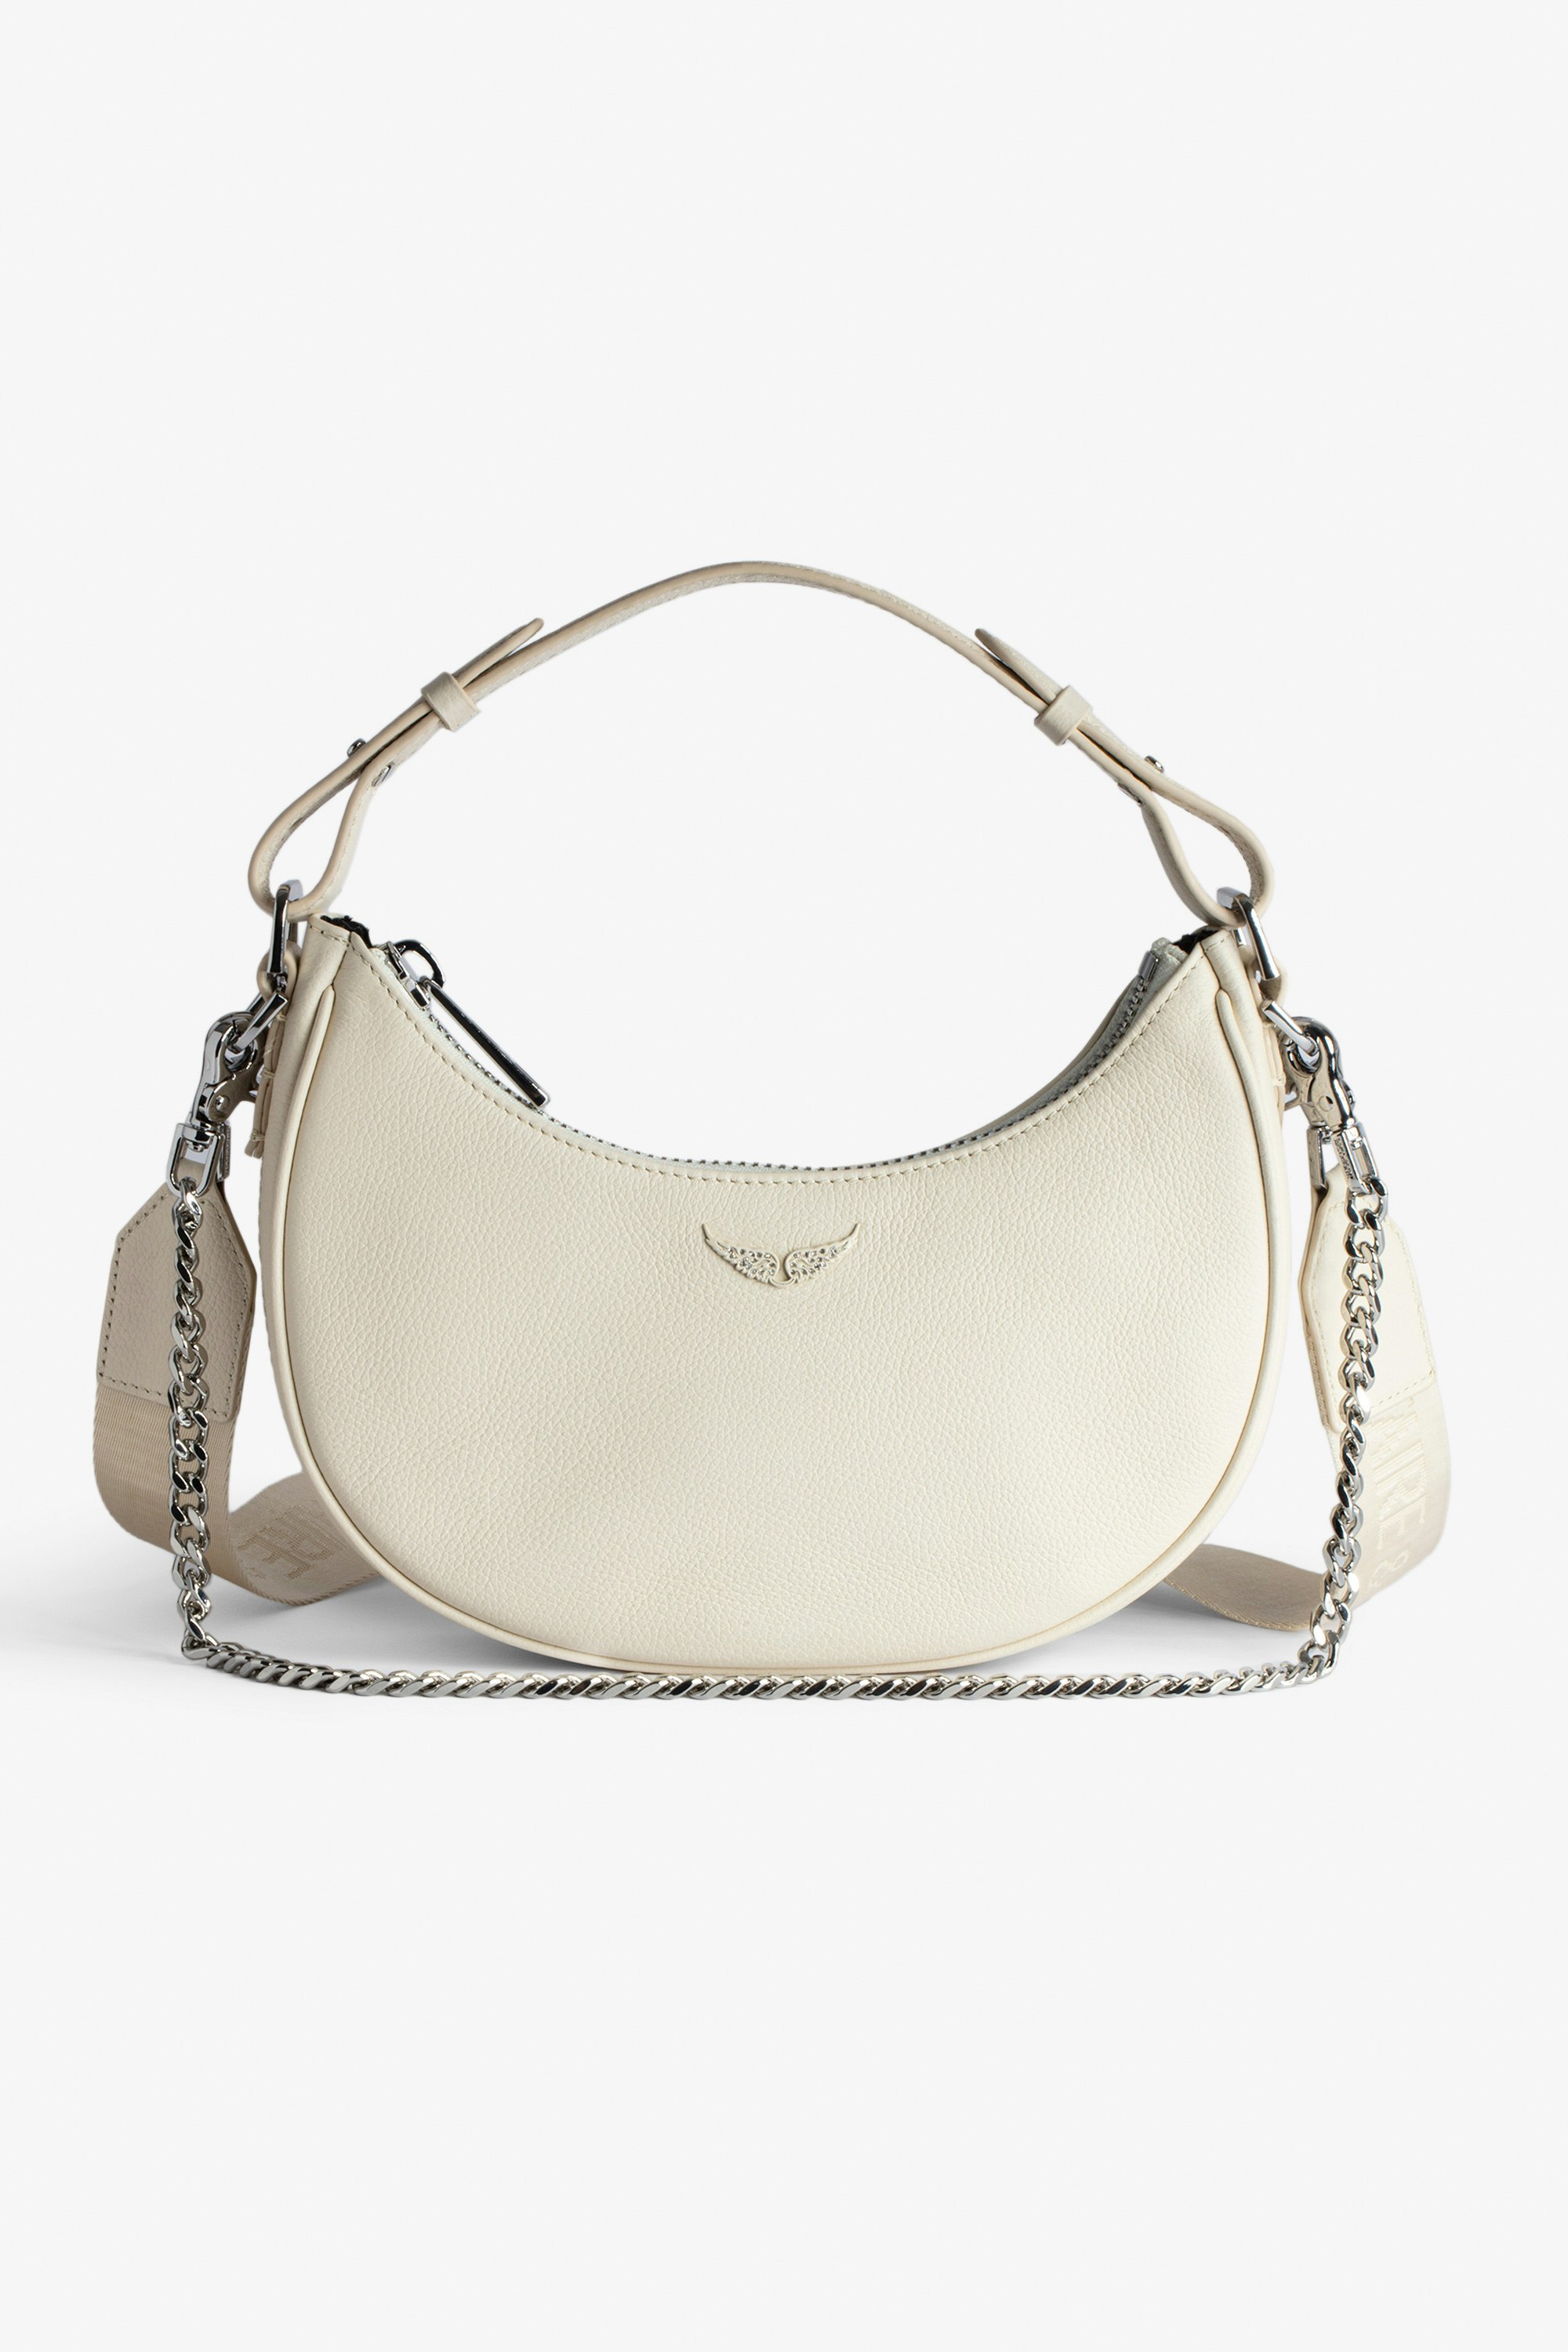 Moonrock bag Women’s half-moon bag in ecru grained leather with a short handle, shoulder strap, chain and signature wings.